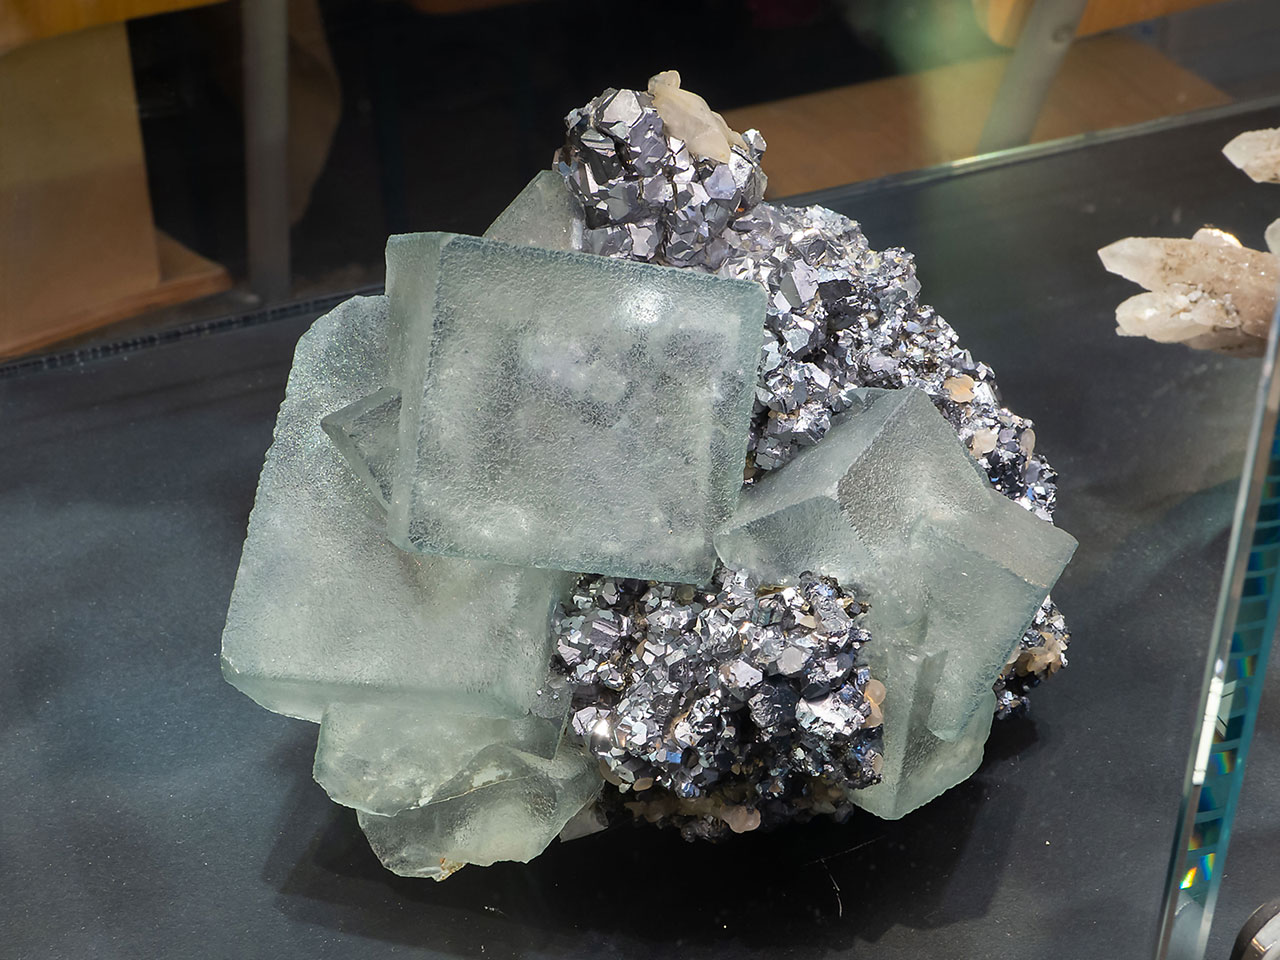 Big cluster of green fluorite crystals with galena from 2nd Sovetskyi Mine, Dalnegorsk, Russia